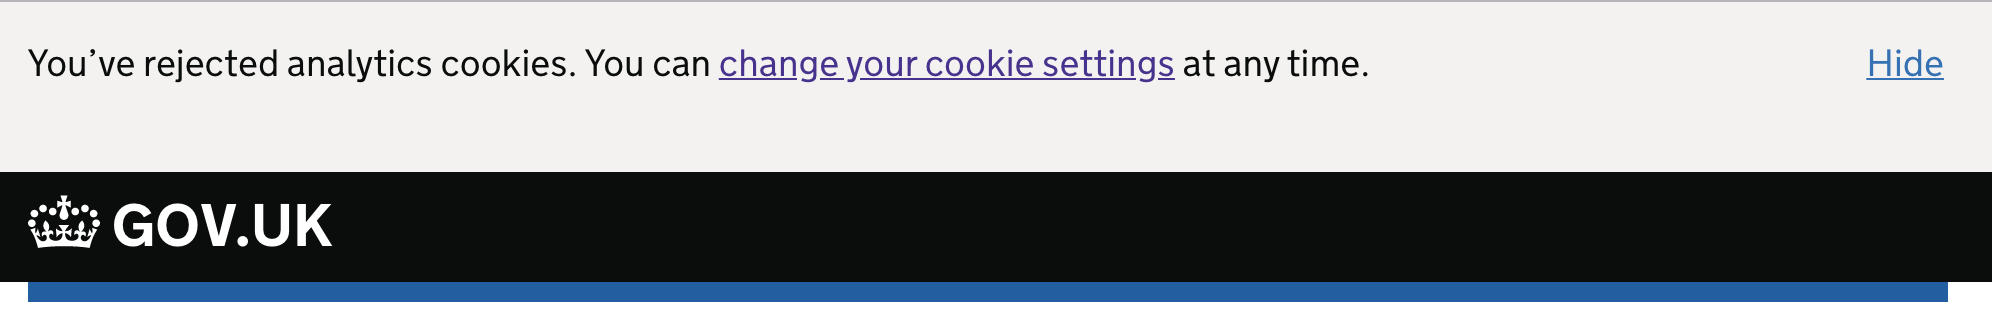 If the user does not accept the use of cookies, a confirmation message is displayed with a link which allows them to change their cookie setting at any time